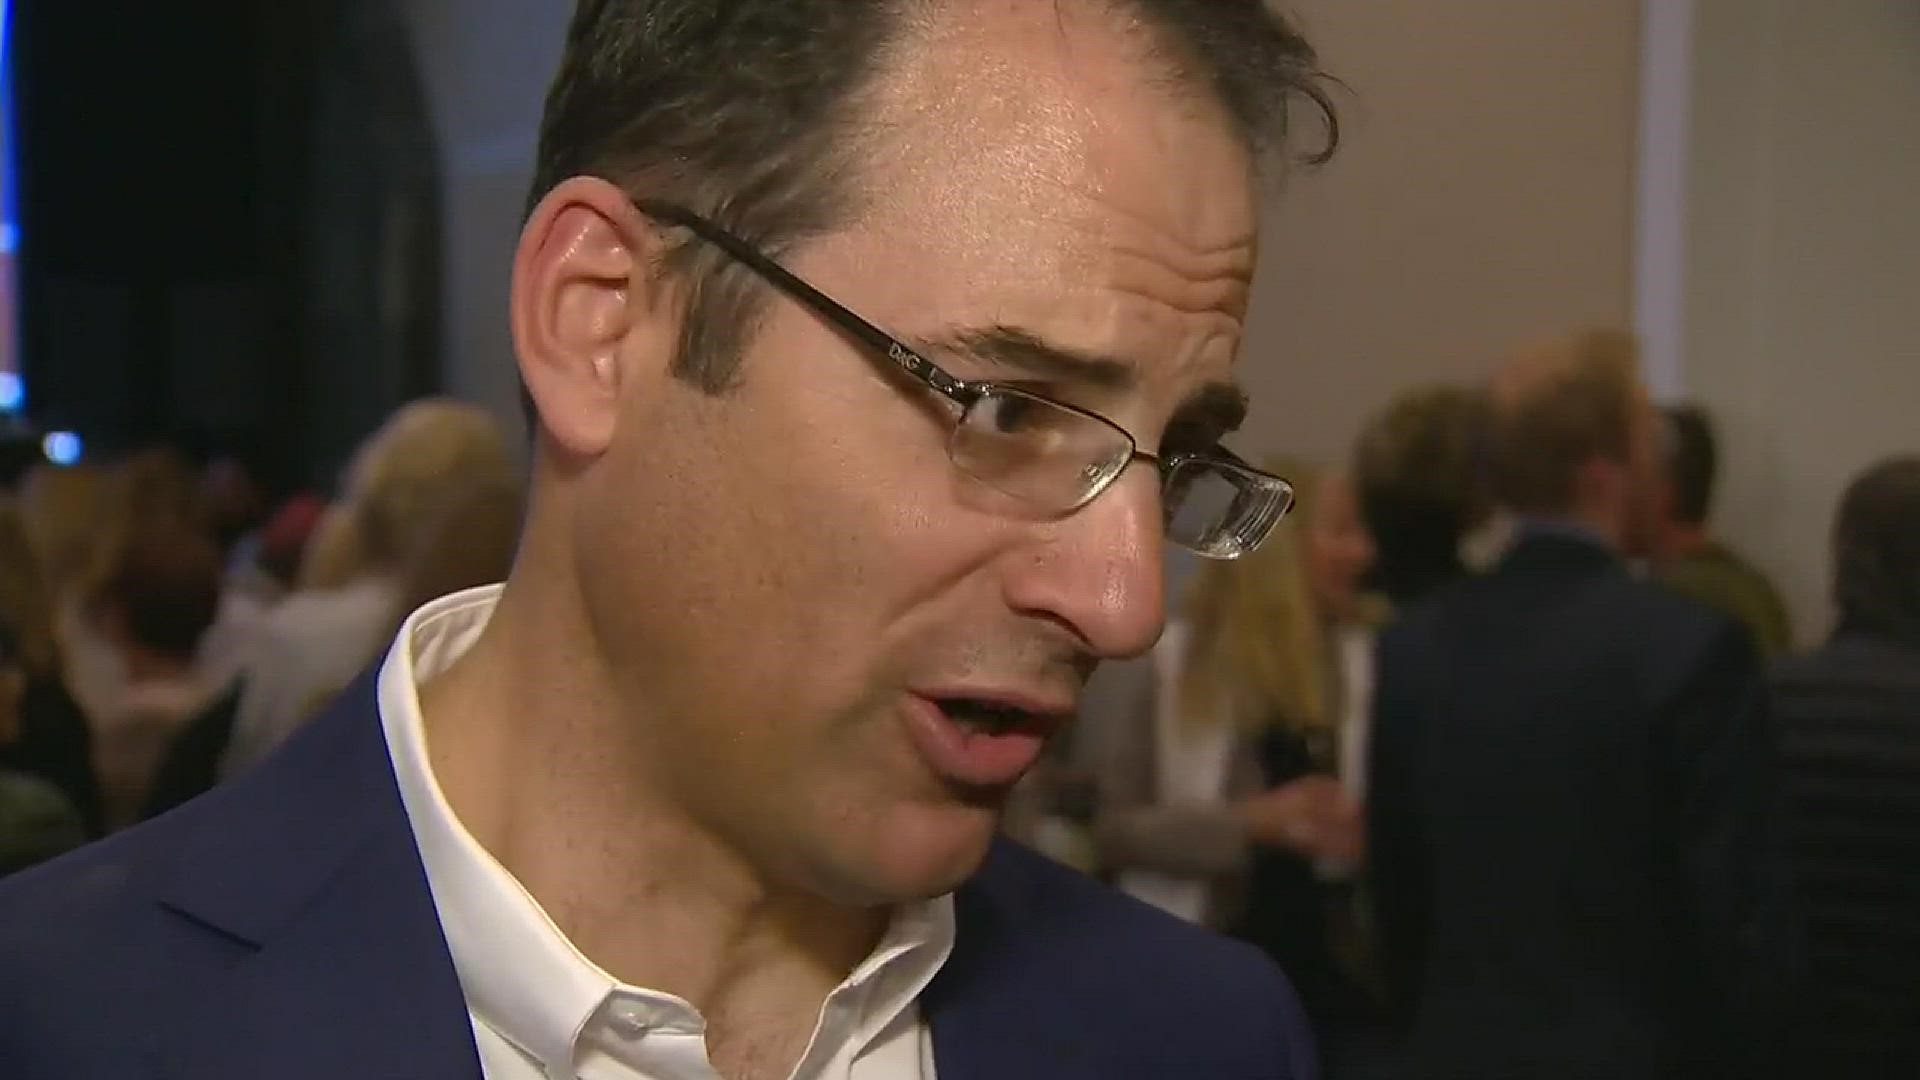 Democrat Phil Weiser will be Colorado's next attorney general after defeating Republican George Brauchler on Election Night.